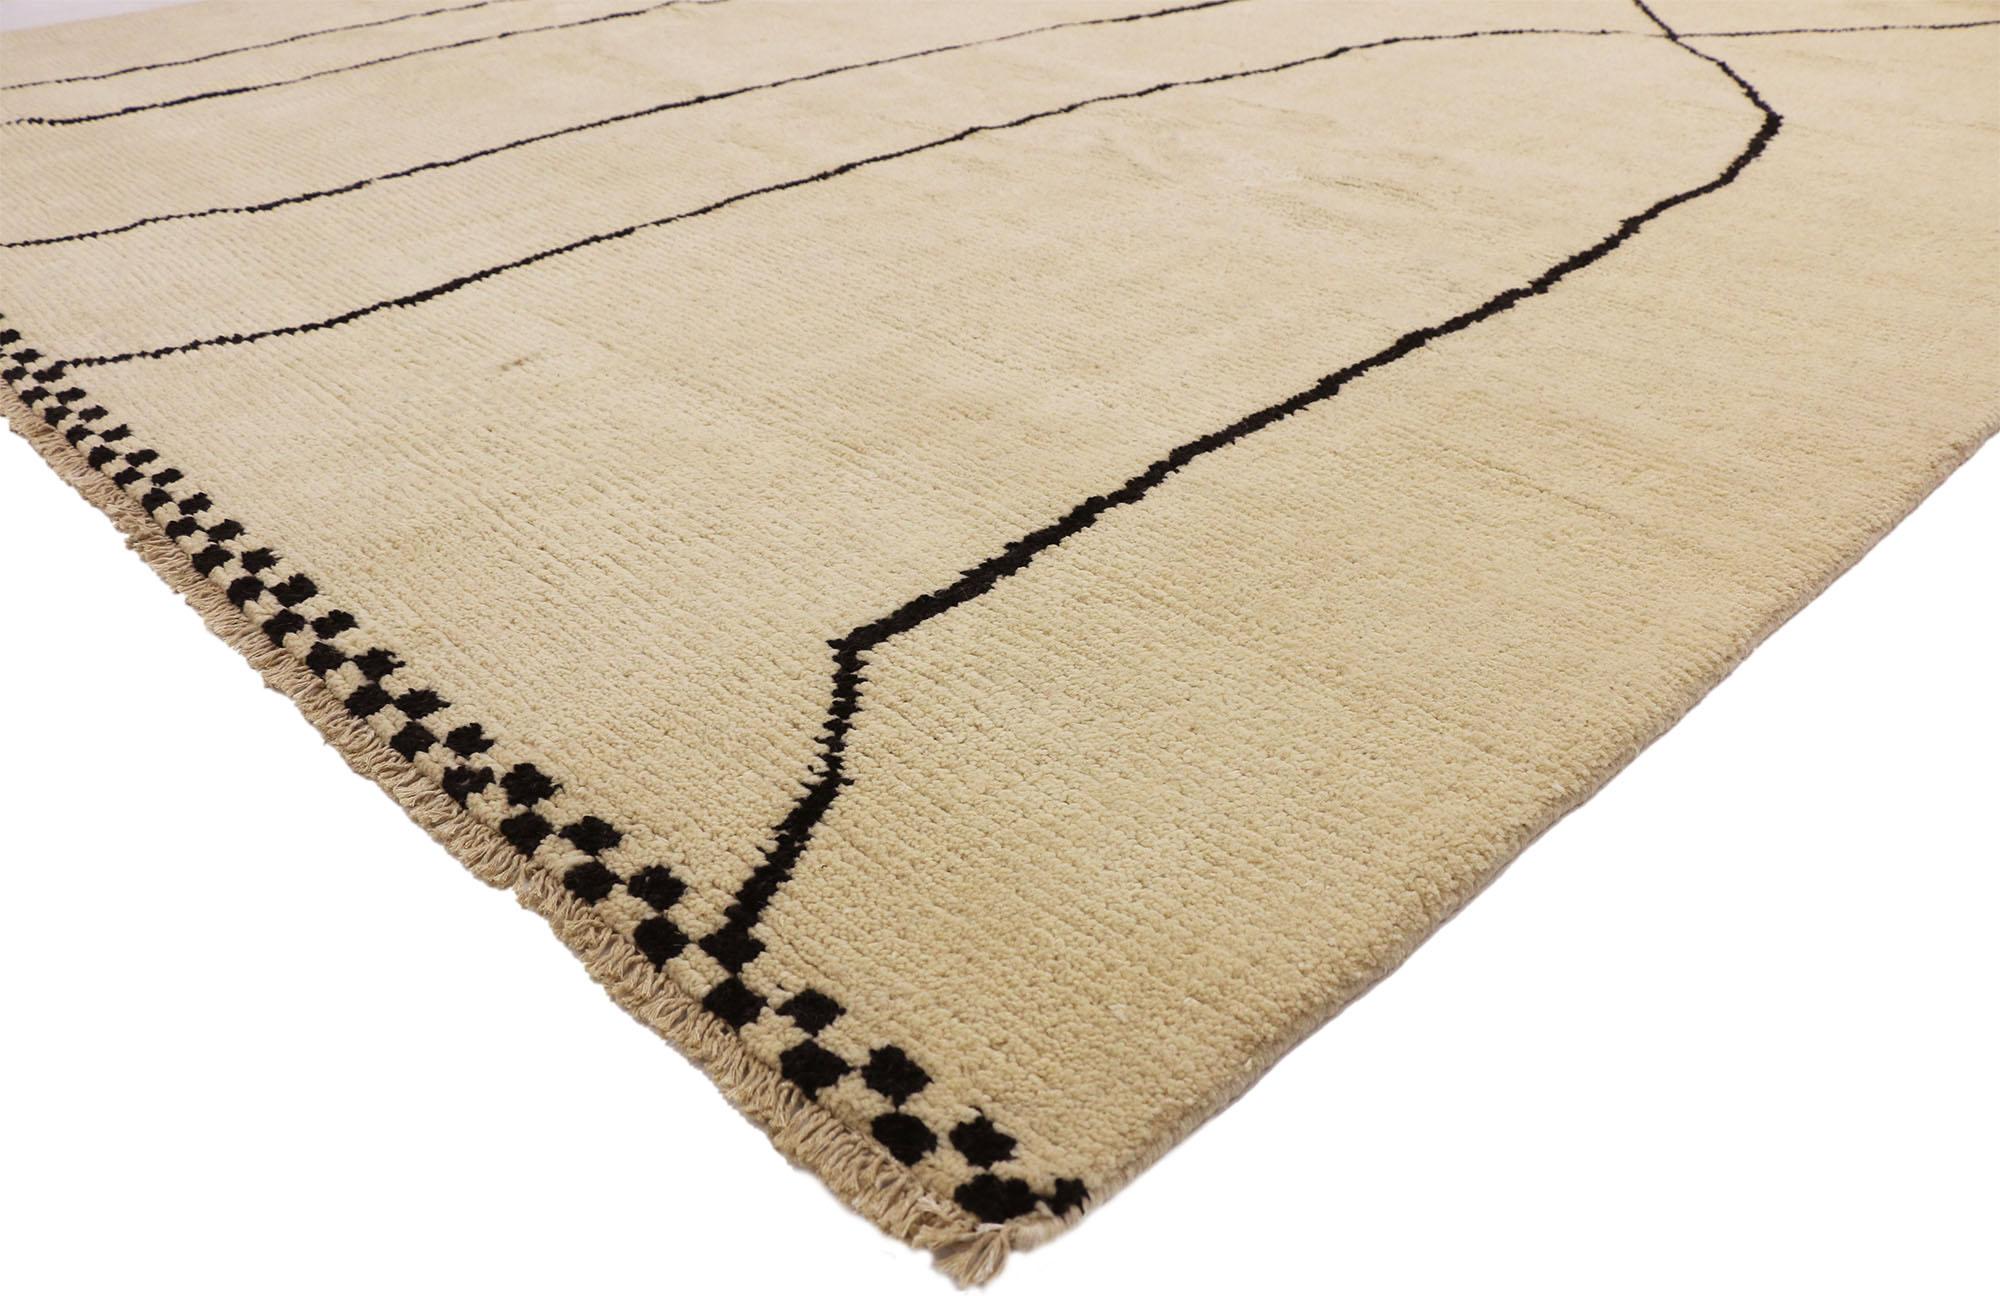 80499 new contemporary Moroccan area rug with Modern style. This hand knotted wool contemporary Moroccan area rug with Minimalist style features five vertical contrasting black lines running the length of the sandy-beige backdrop. The thin black